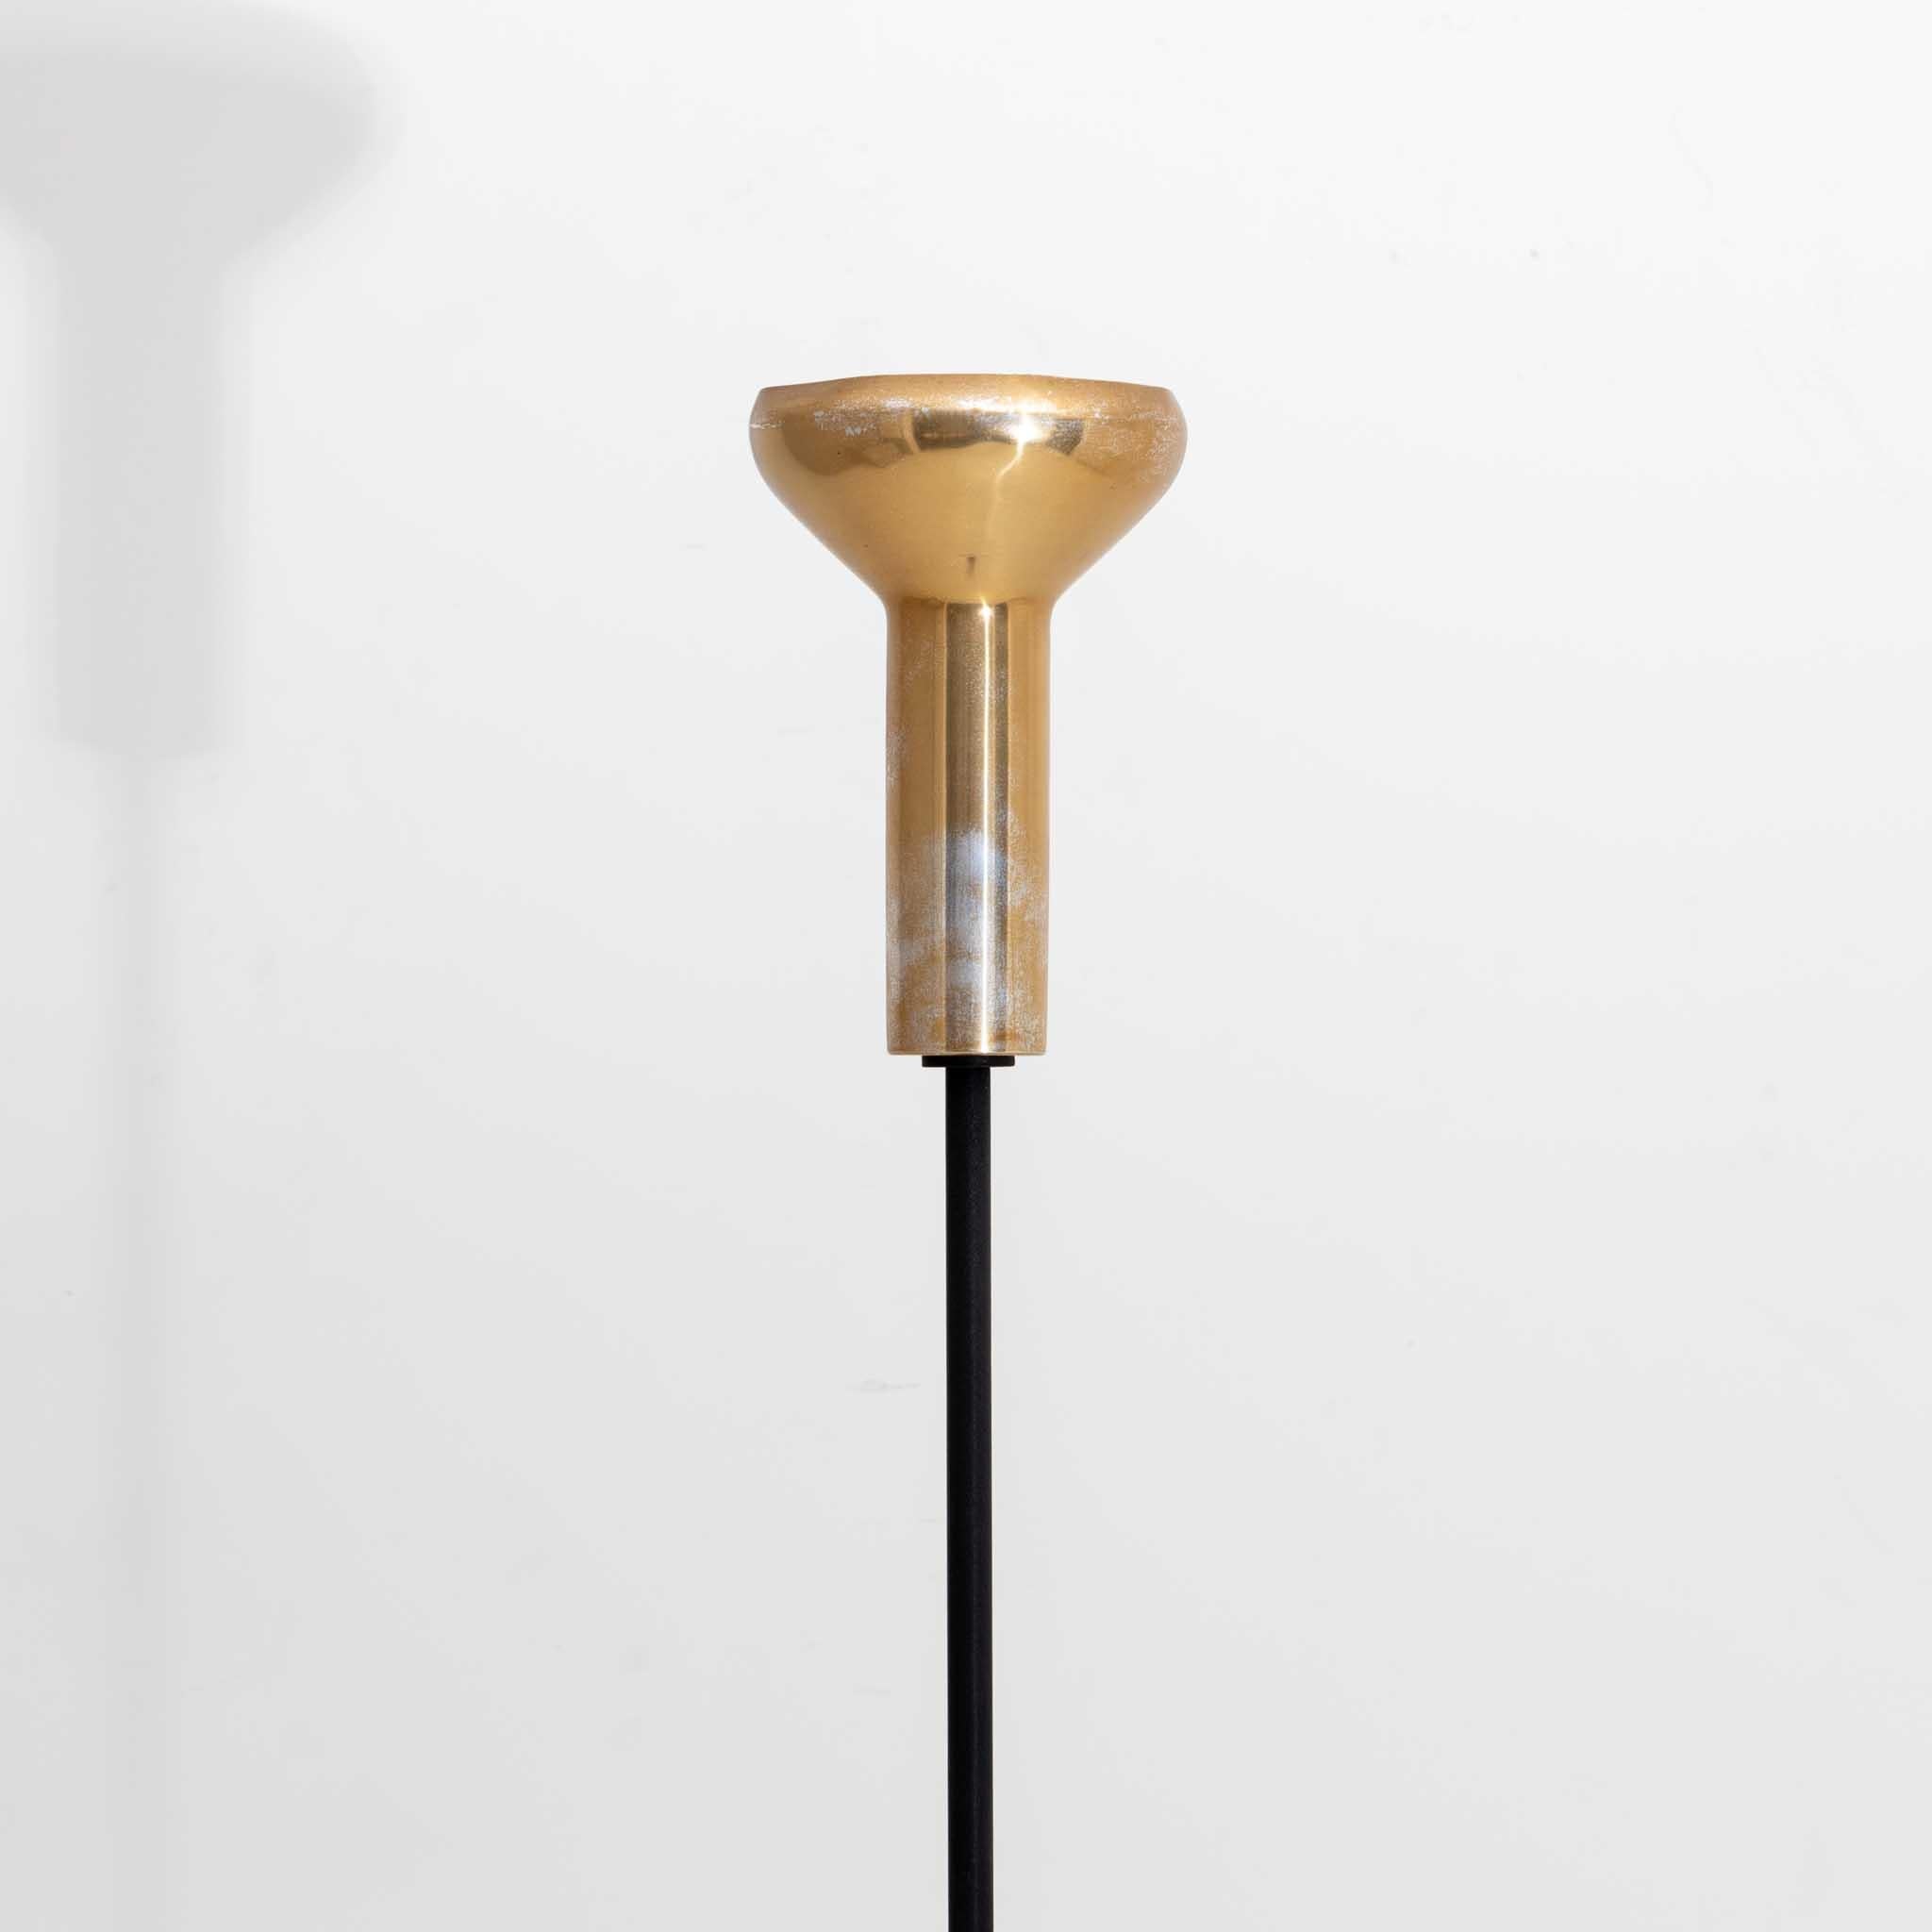 Floor Lamp Model 1073/3 by Gino Sarfatti for Arteluce, Italy 1956 In Good Condition For Sale In Greding, DE